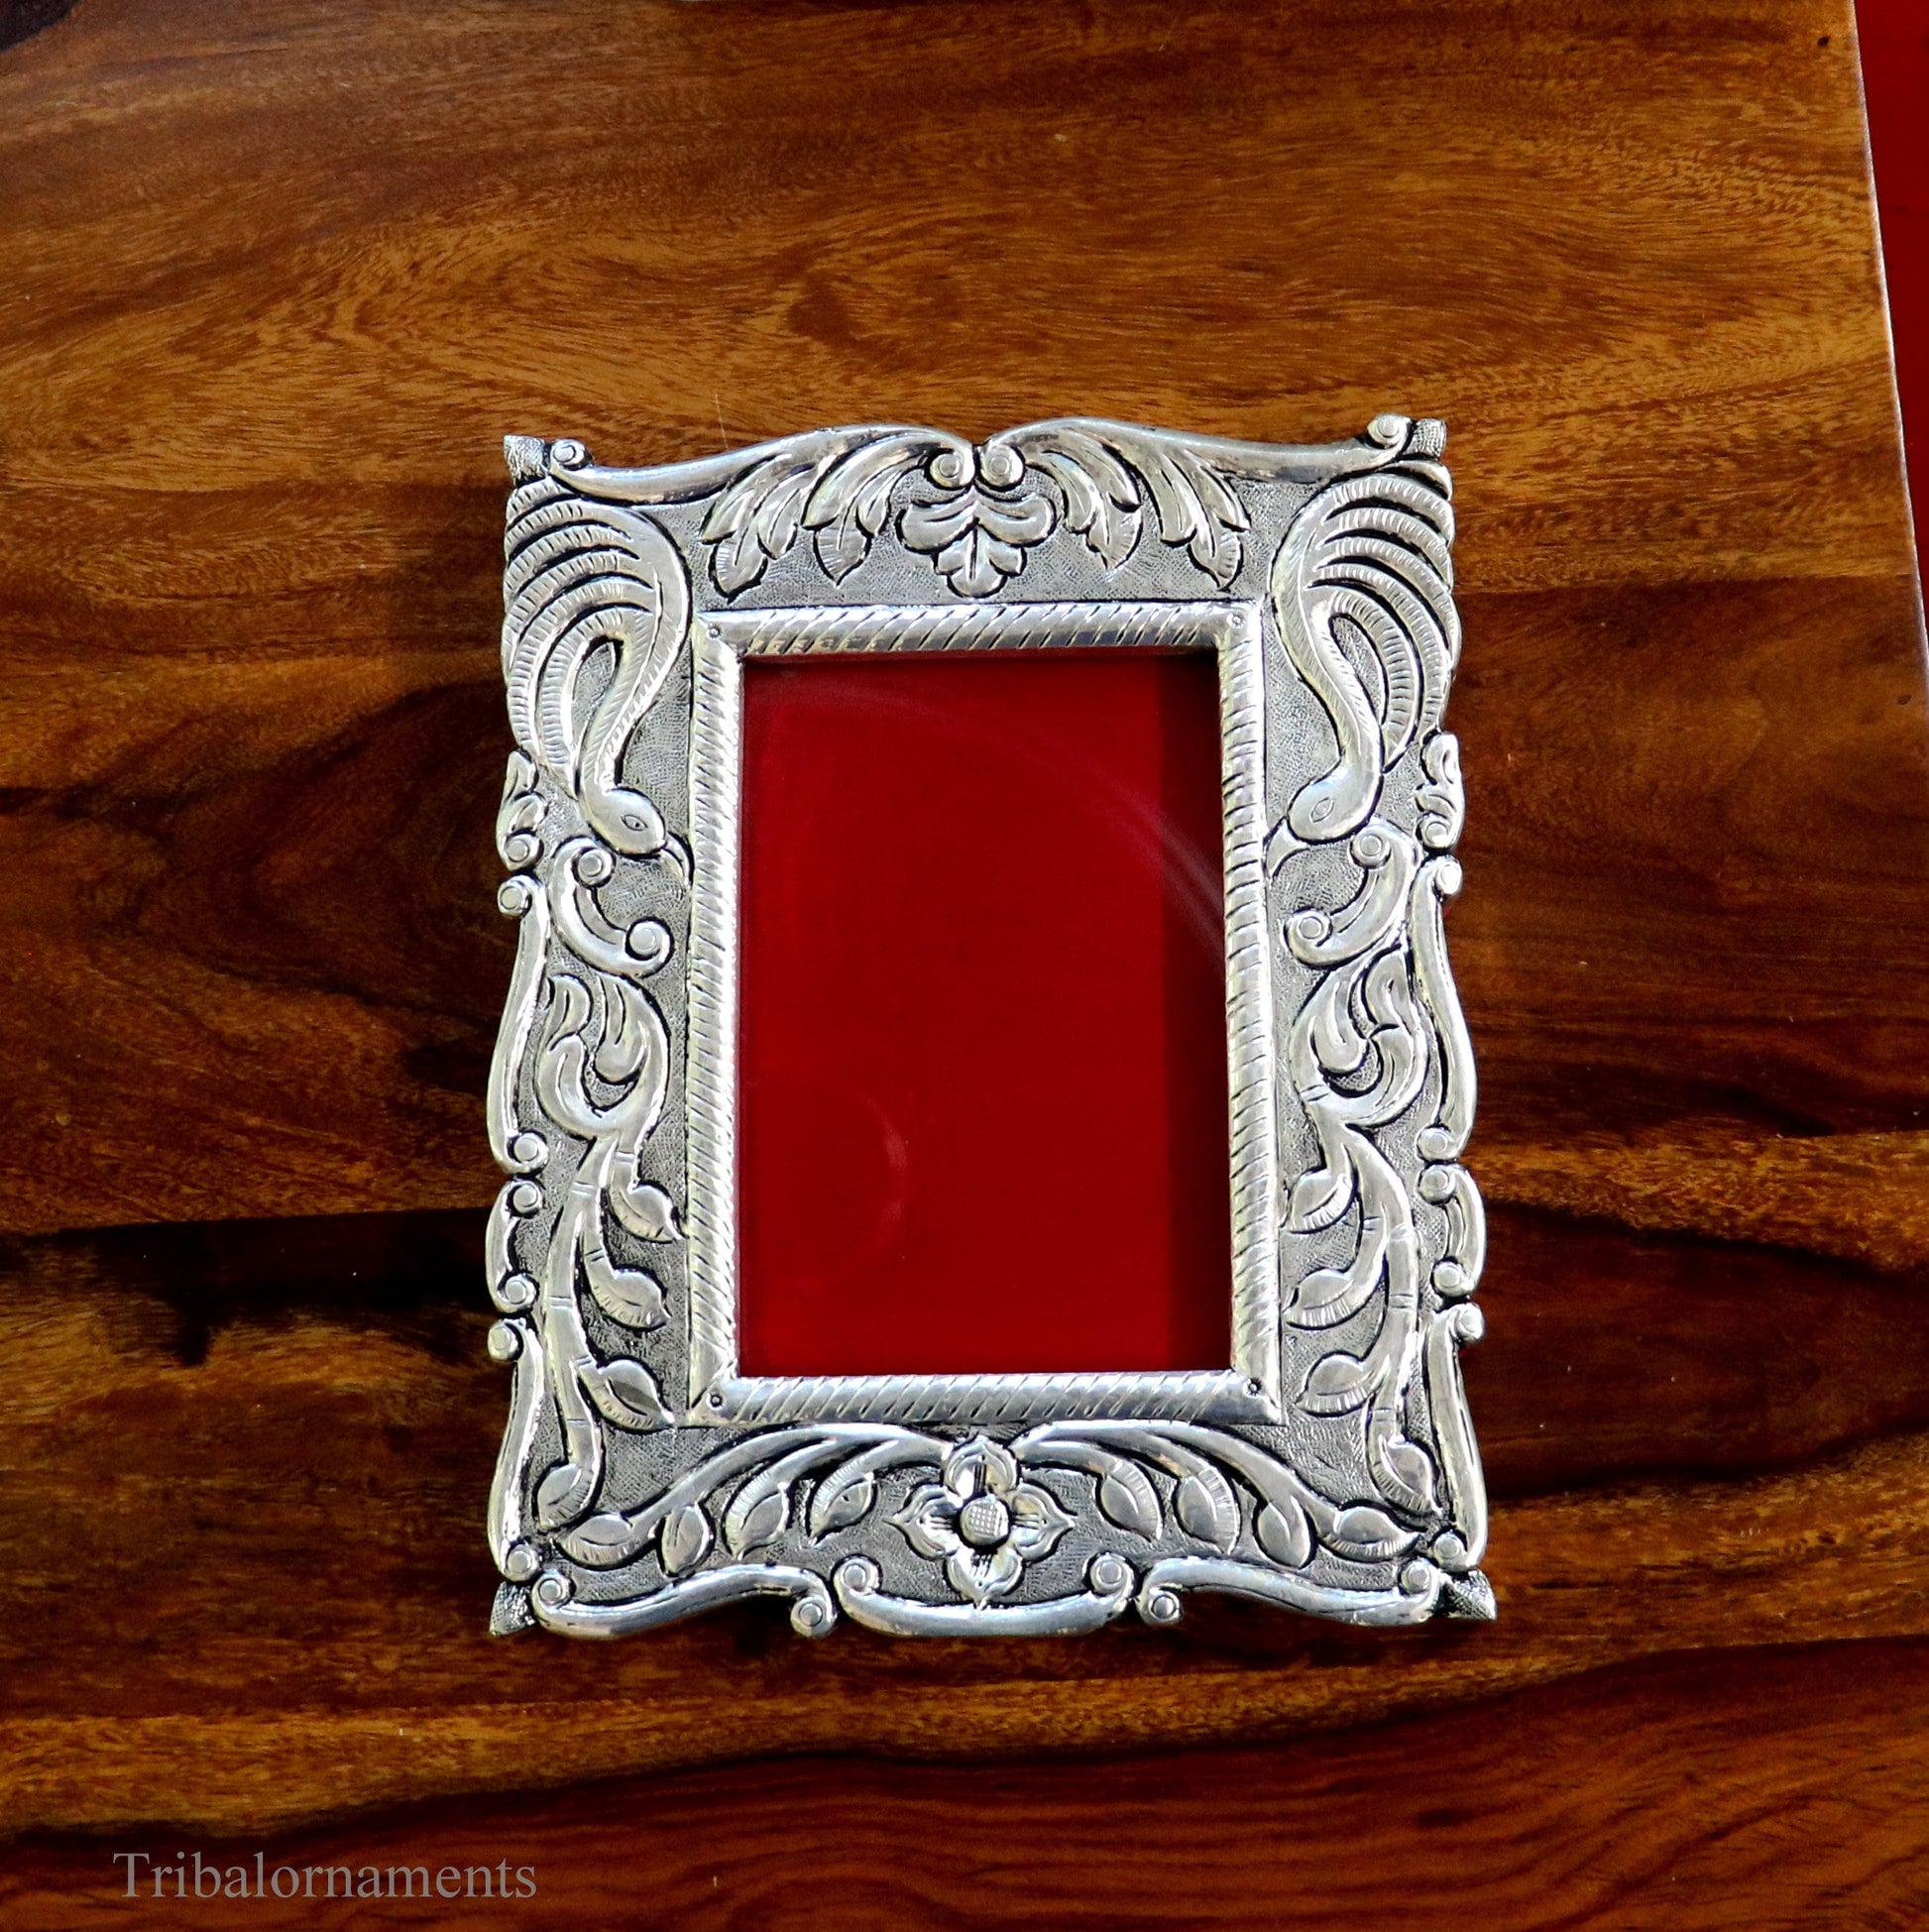 12.5" x 7" inches 999 fine silver handmade photo frame, amazing vintage royal style wooden base wall hanging frame, best corporate gift sf01 - TRIBAL ORNAMENTS